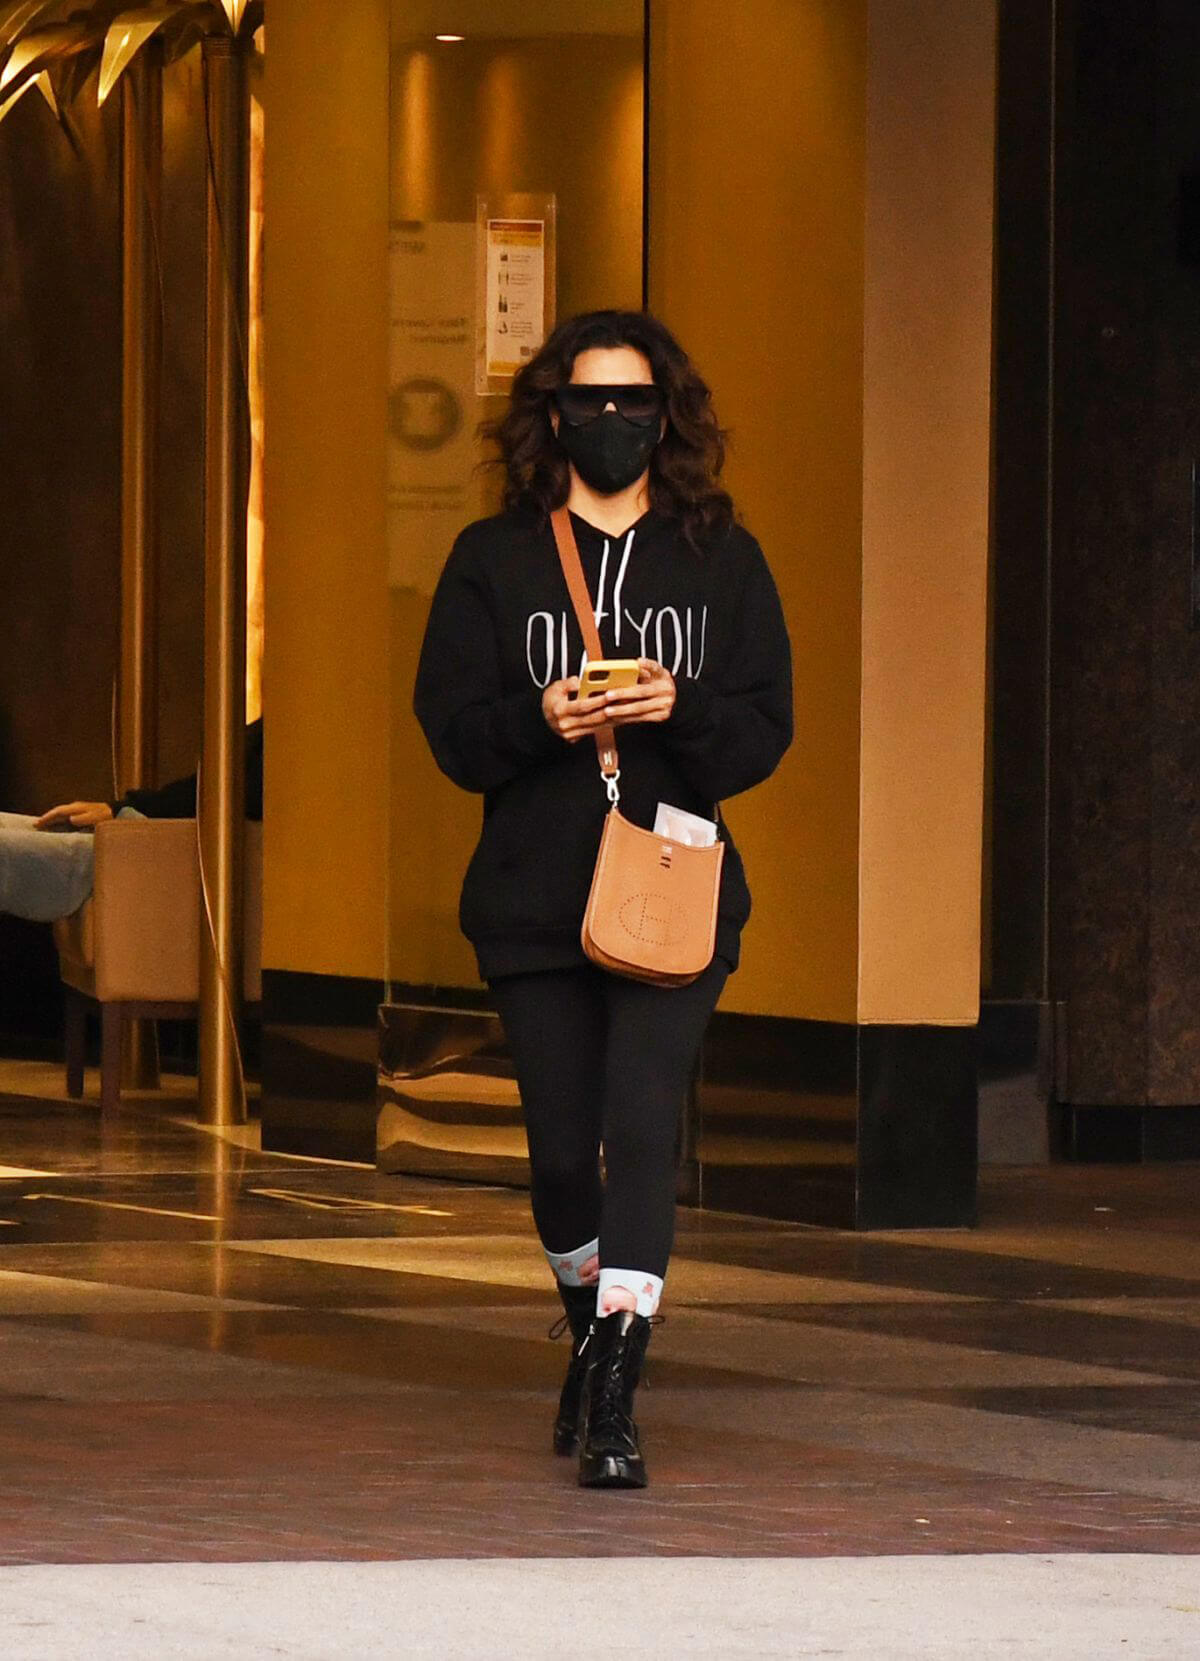 Eva Longoria seen Black Outfit and Wearing a Mask Out in Los Angeles 11/23/2020 6